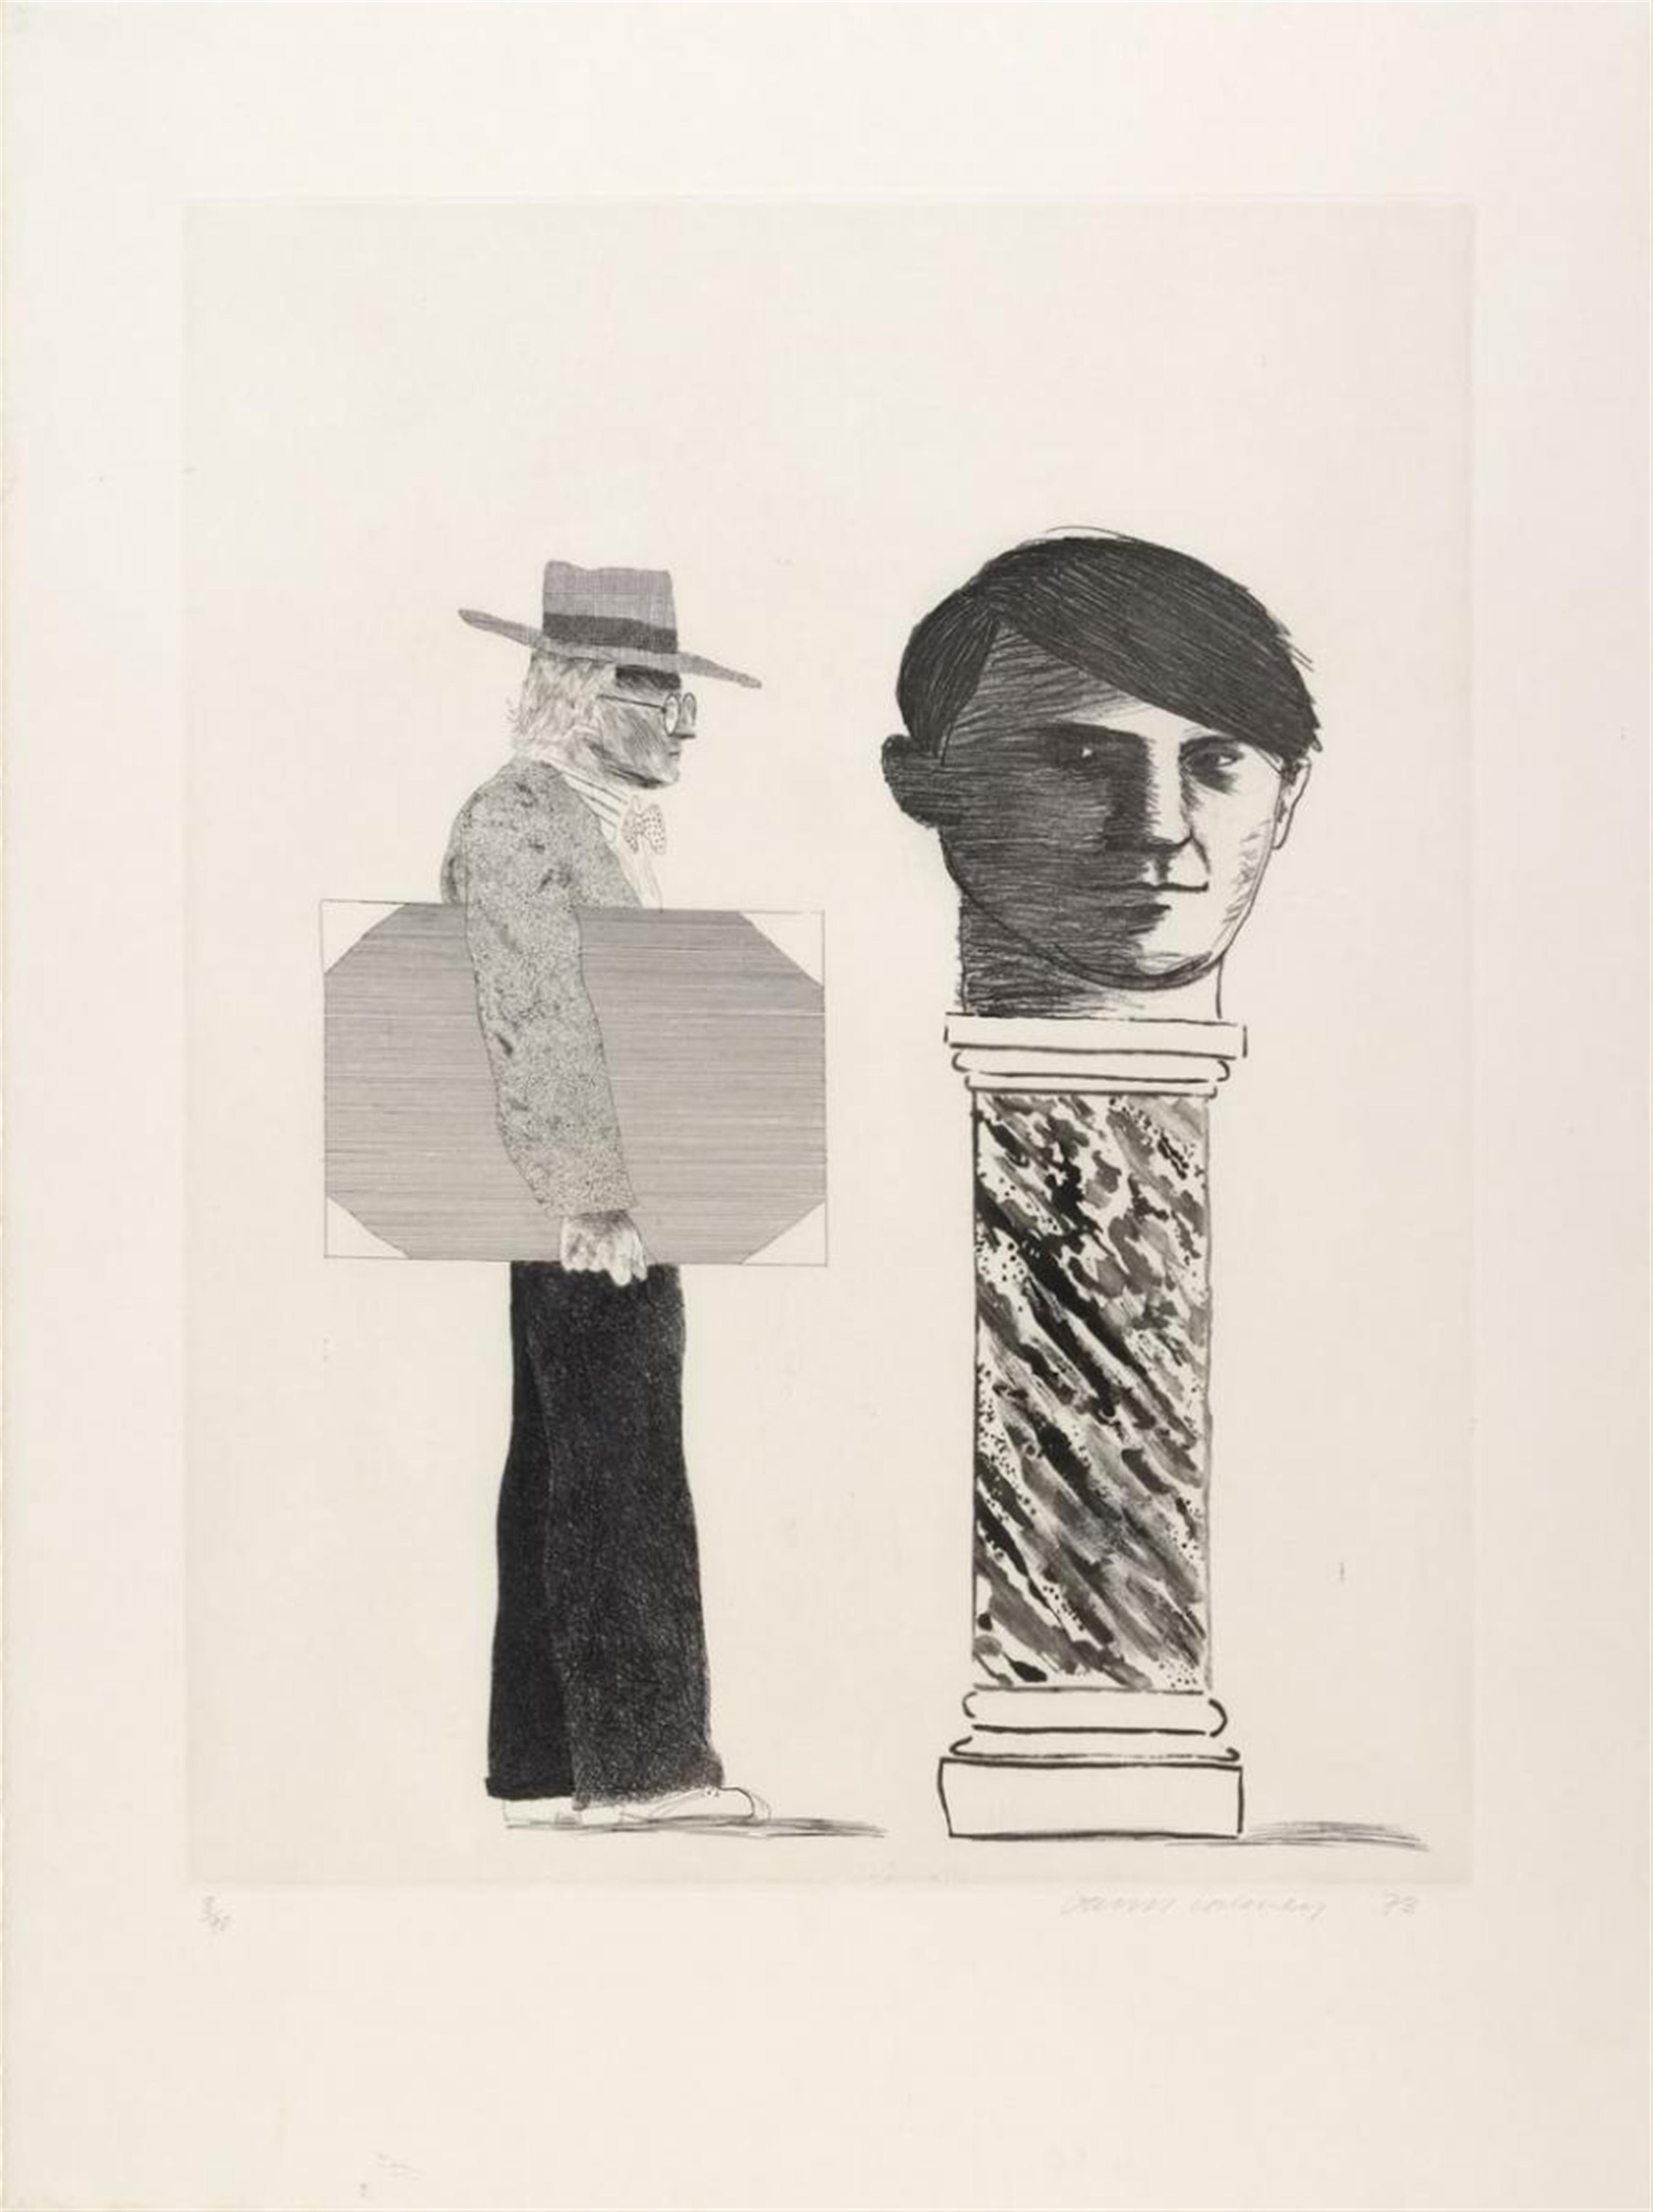 David Hockney - The Student: Homage to Picasso - image-1